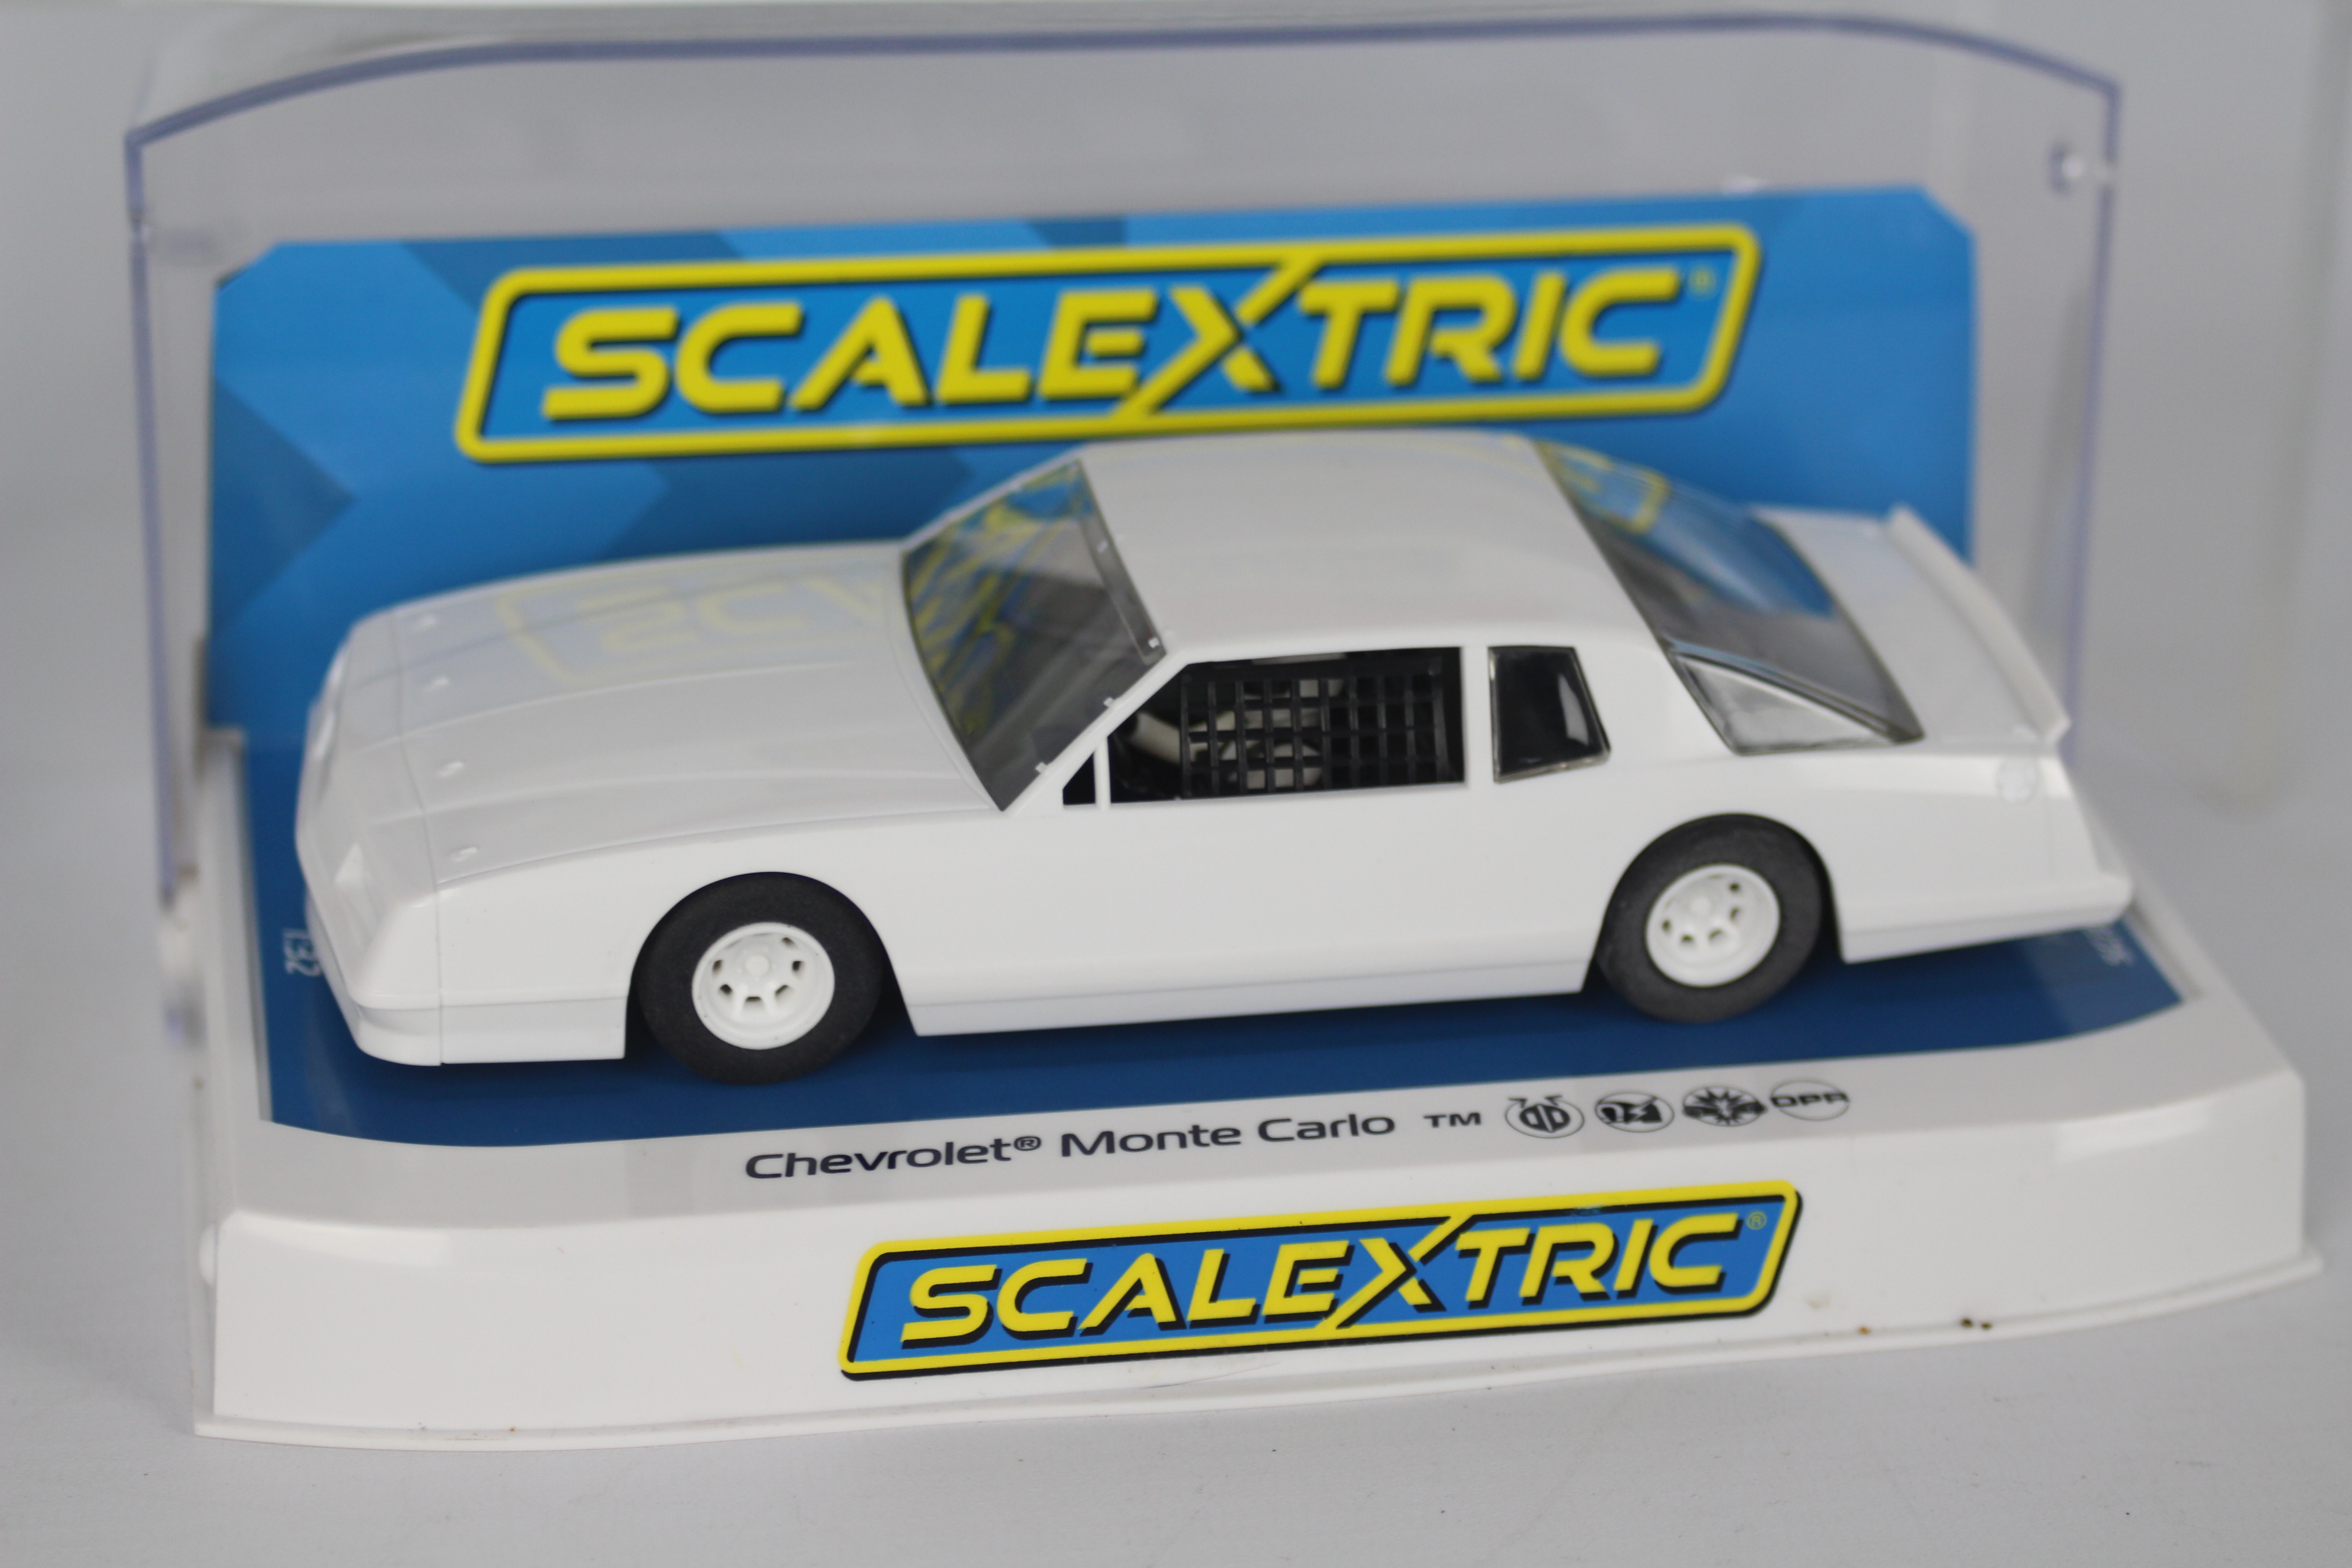 Scalextric - Two boxed Scalextric 1:32 scale slot cars. - Image 2 of 3